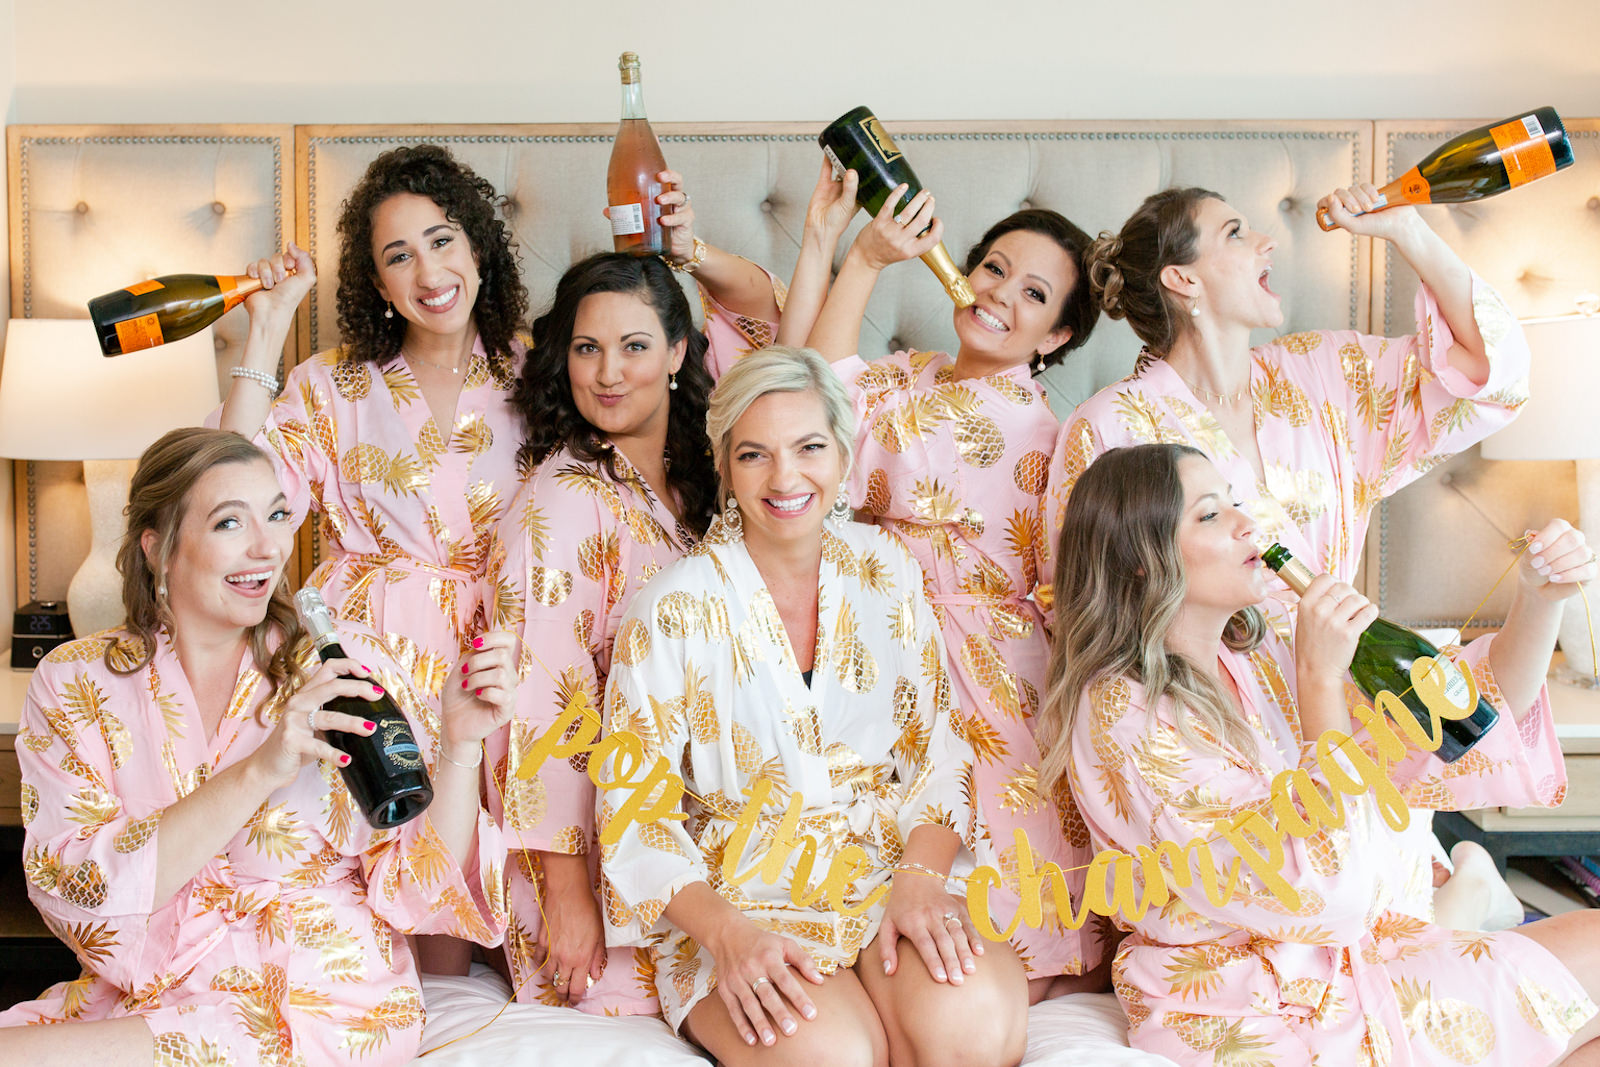 Bride Getting Ready Wedding Photo Wearing White and Gold Foil Pineapple Tropical Robe, Bridesmaids in Matching Pink with Gold Foil Pineapple Robes Drinking Champagne with Pop the Champagne Banner | Special Moments Event Planning